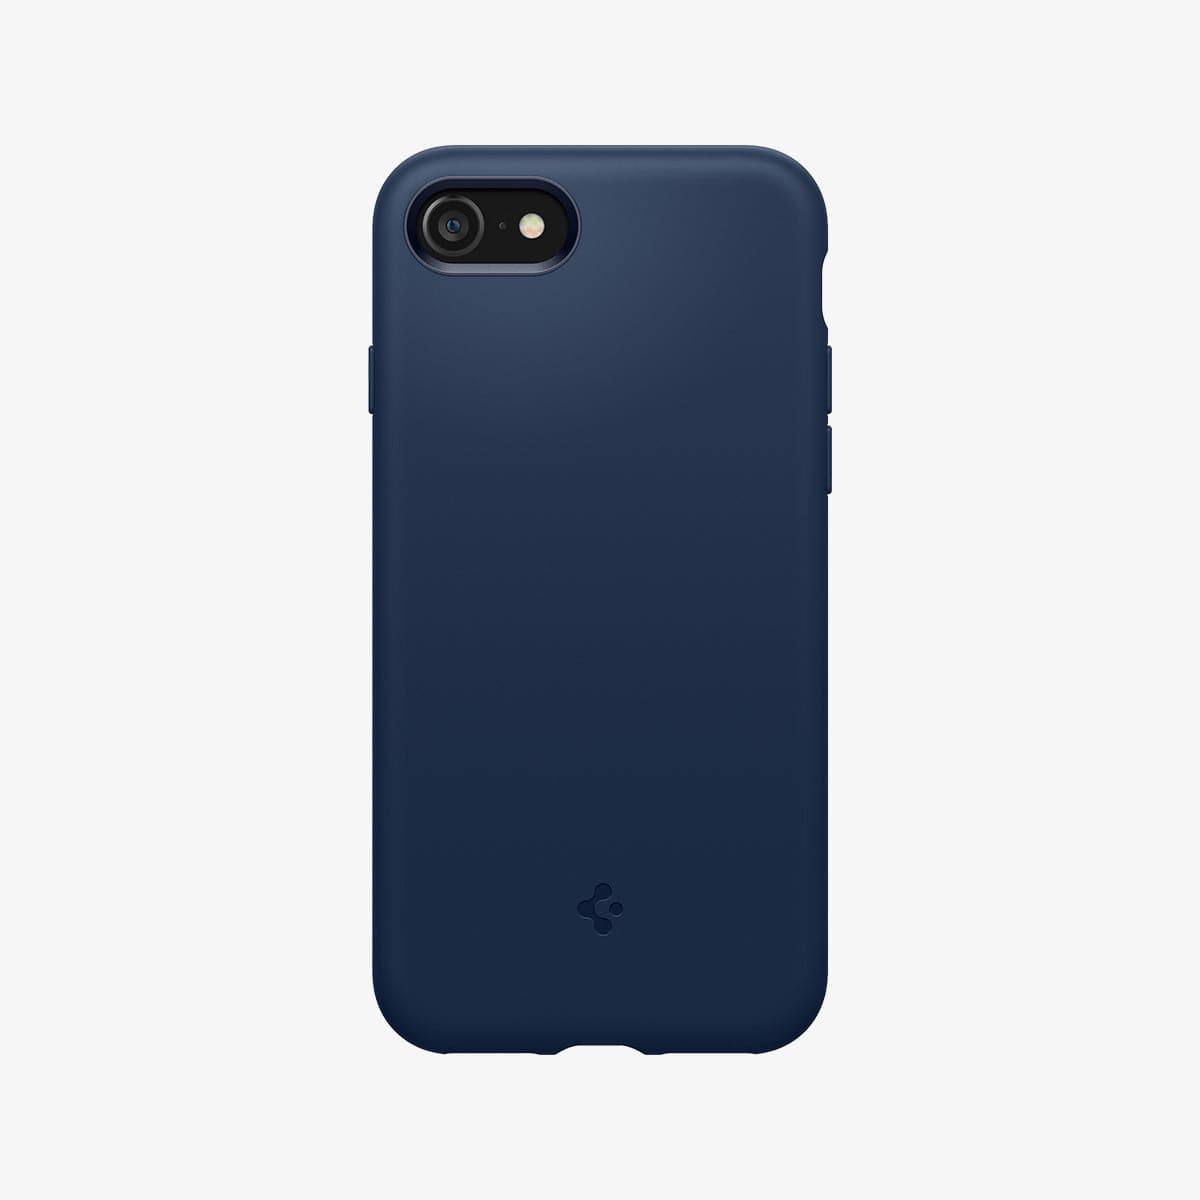 ACS04350 - iPhone 7 Series Silicone Fit Case in Navy Blue showing the back